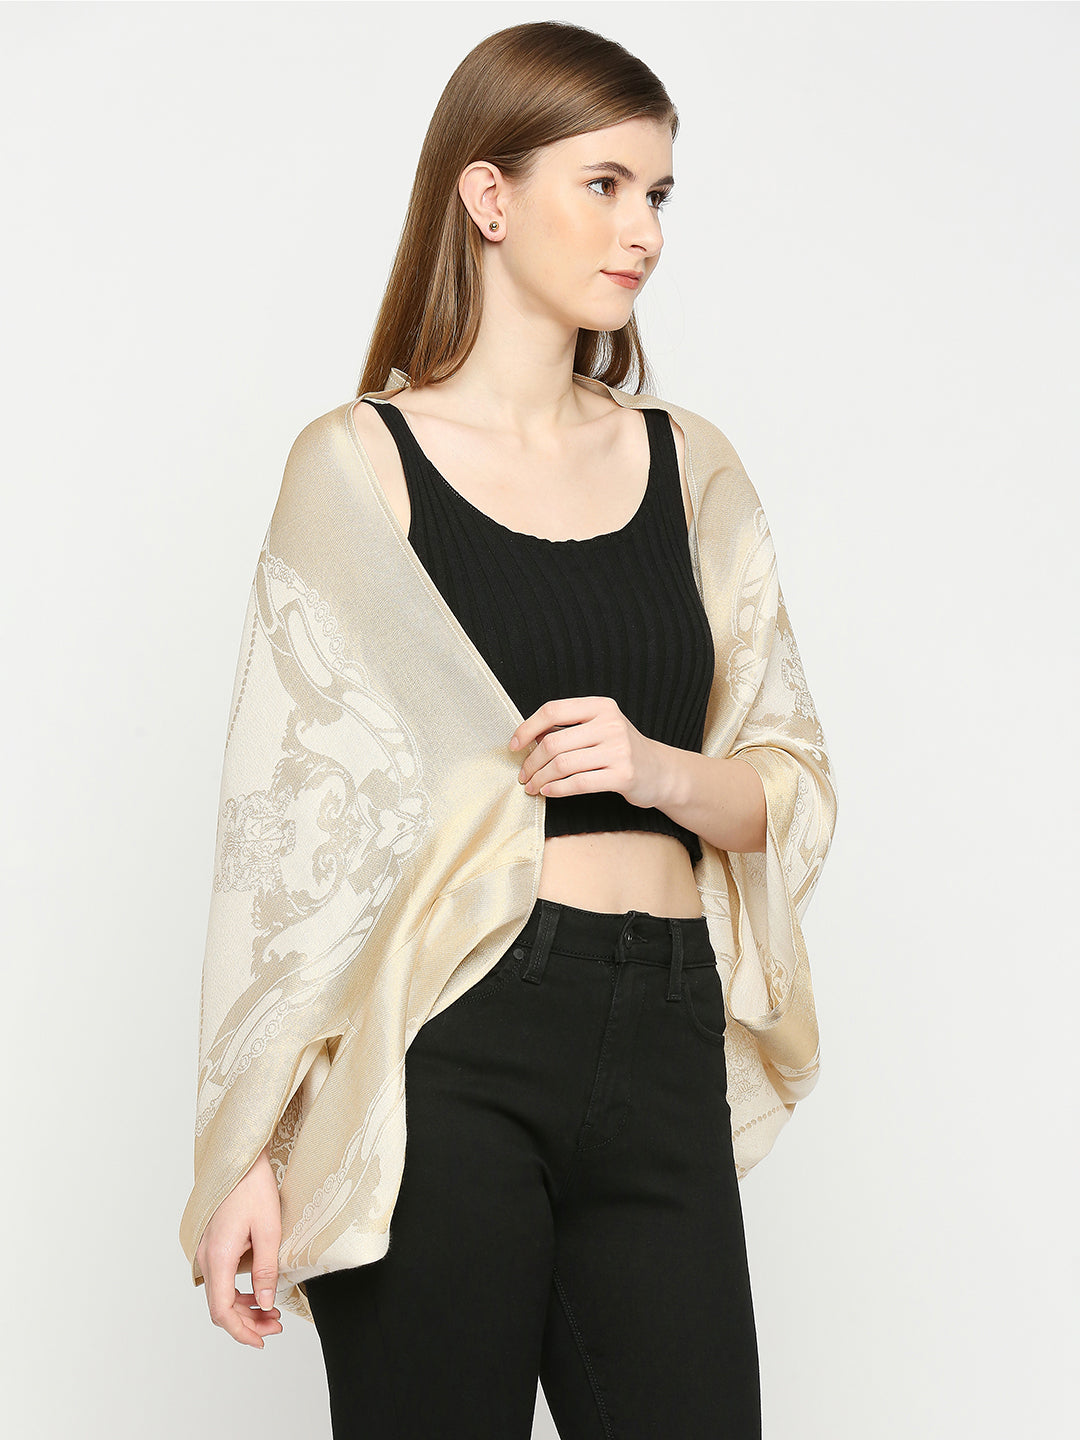 French Rope & Chains Patterned Ivory Cocoon Shrug